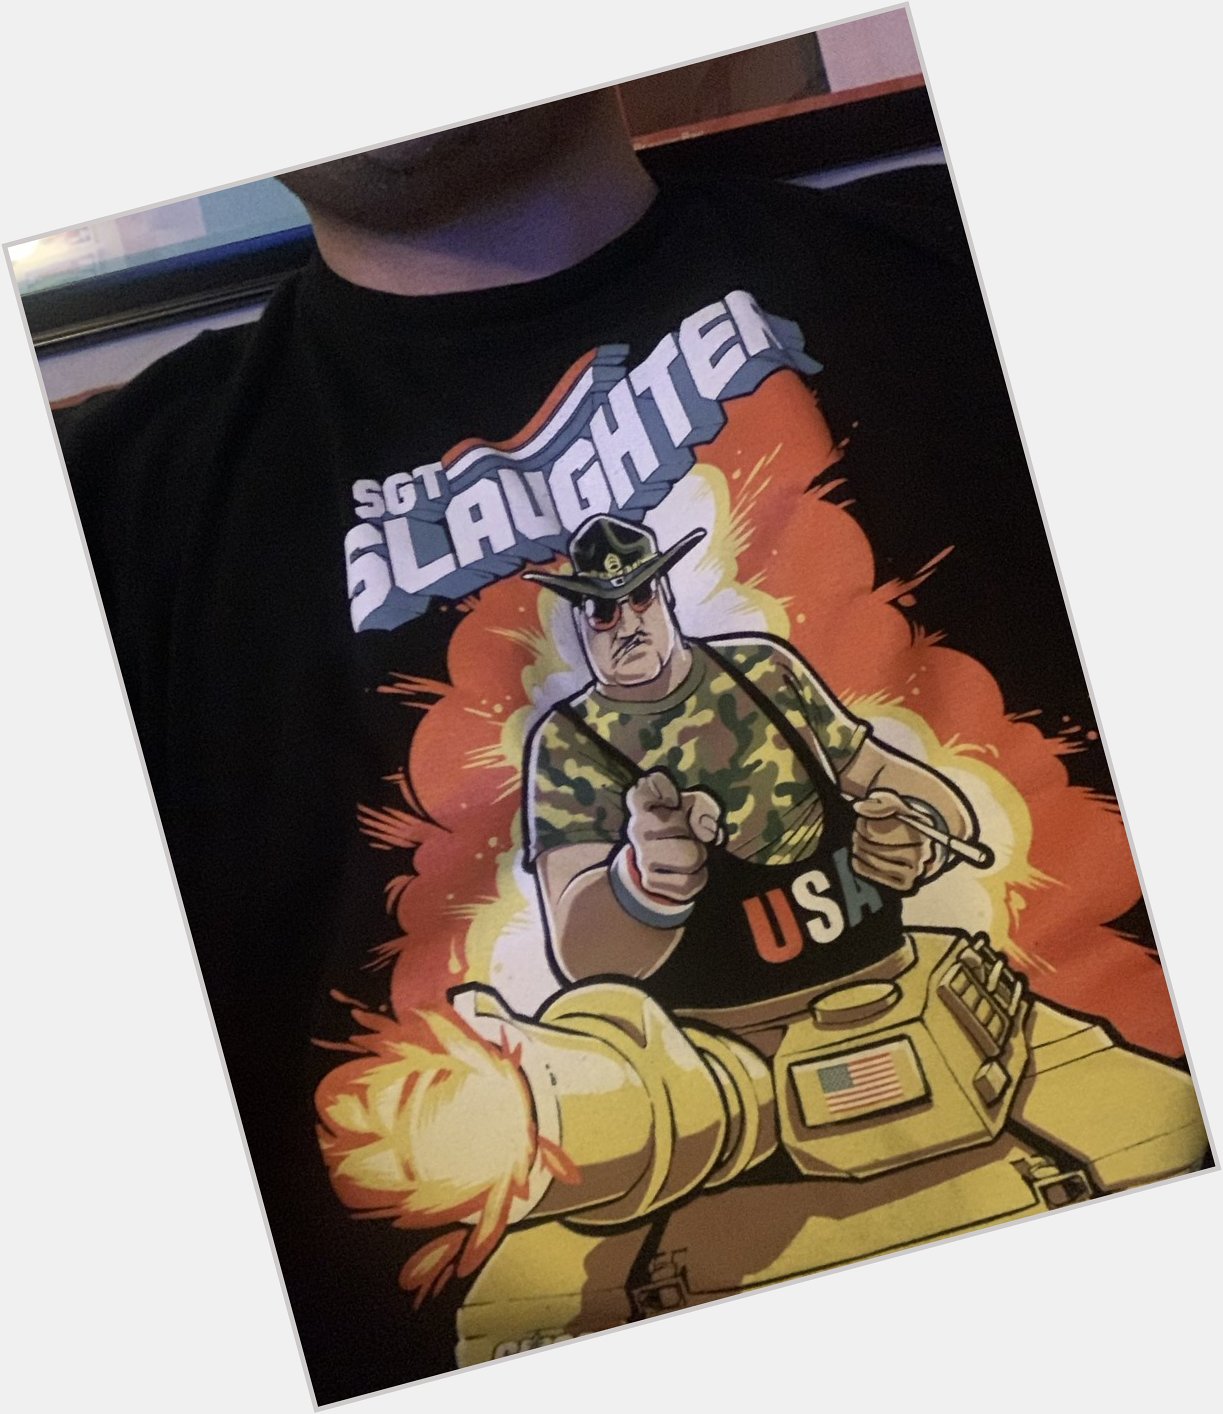  Attention!!! Happy Birthday Sgt Slaughter! I just happen to be wearing one of your tees today! 